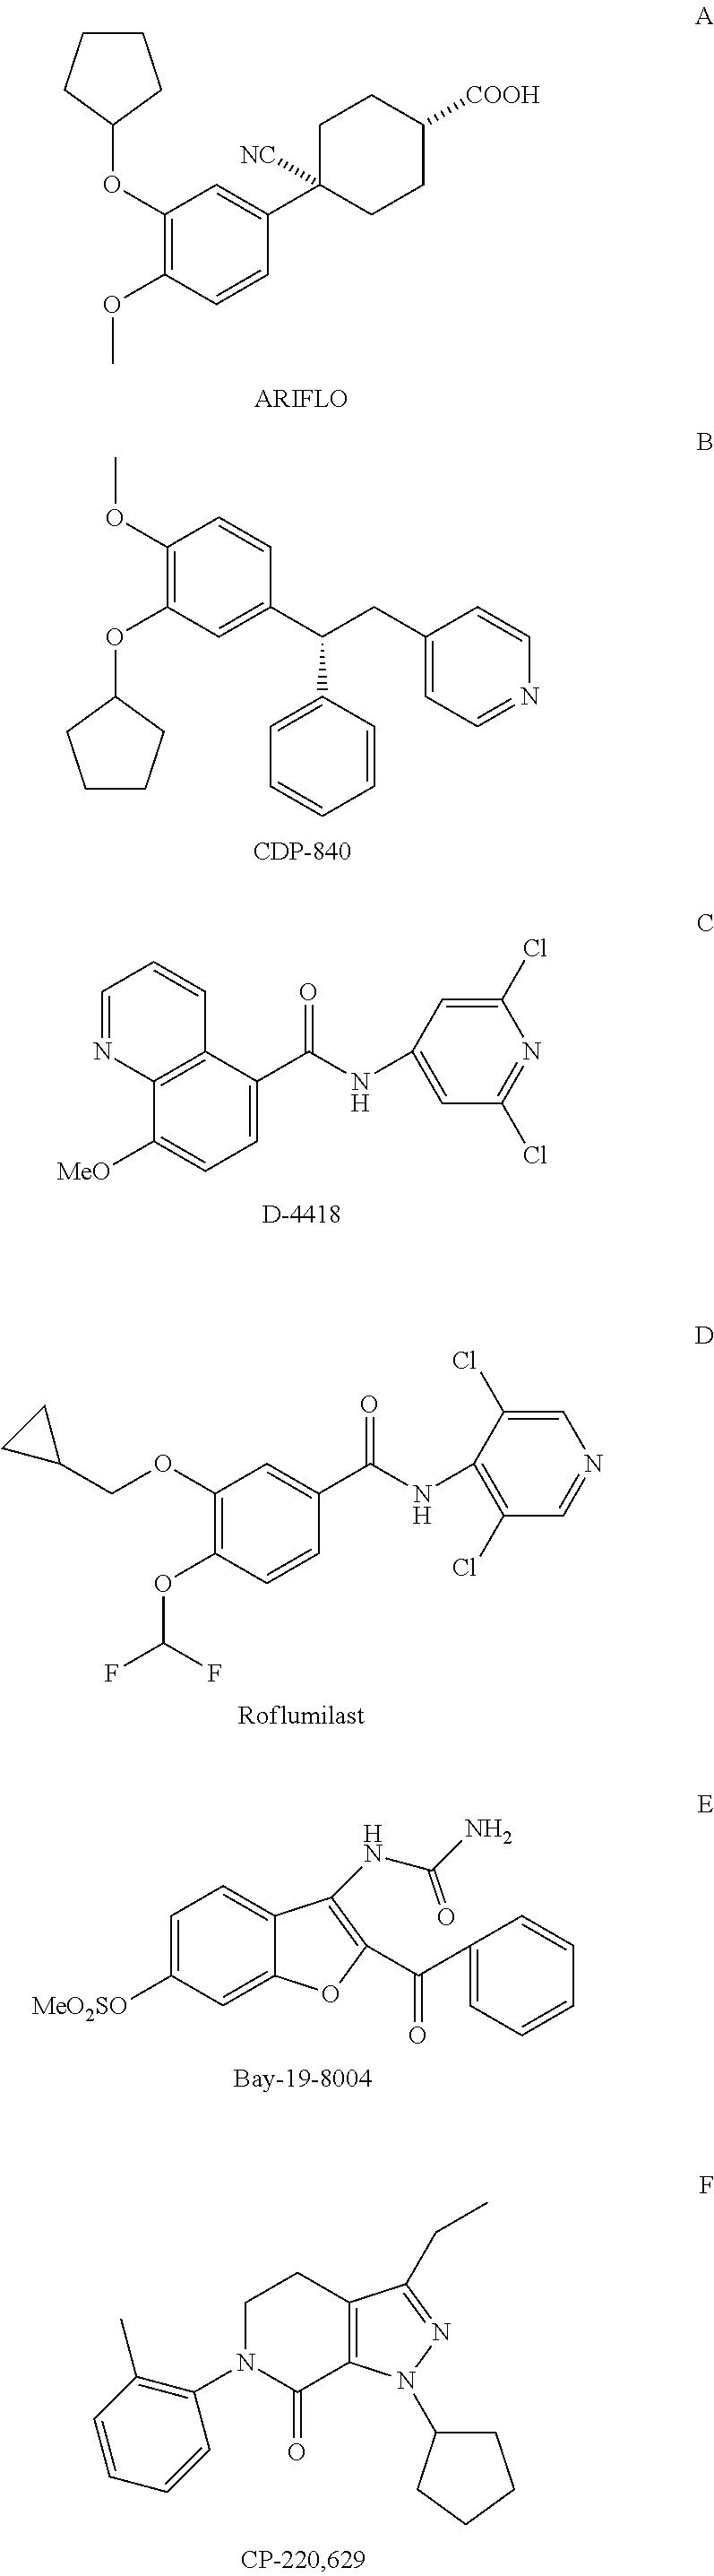 Novel heterocyclic compounds useful for the treatment of inflammatory and allergic disorders: process for their preparation and pharmaceutical compositions containing them